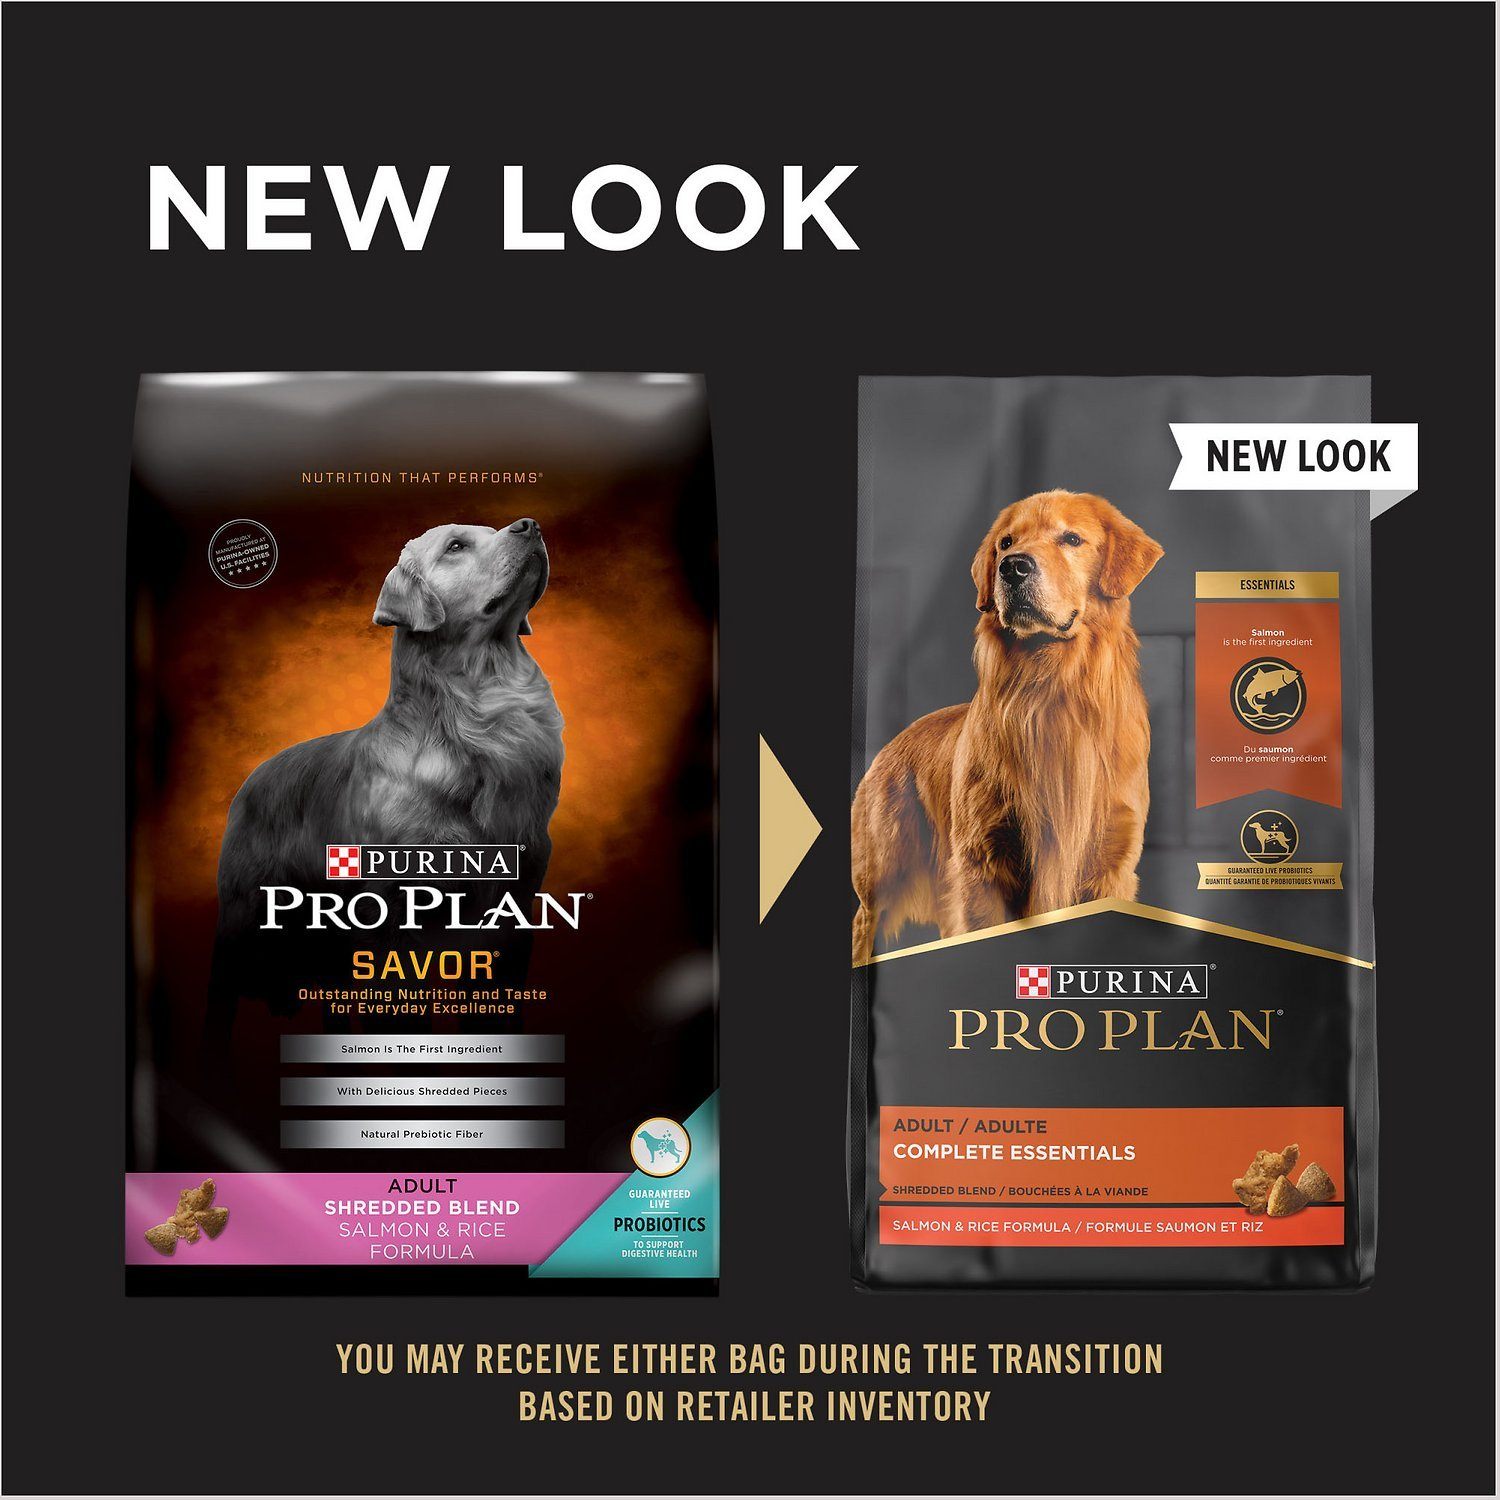 Purina Pro Plan High Protein Dog Food With Probiotics for Dogs Shredded Blend Salmon & Rice Formula  Dog Food  | PetMax Canada